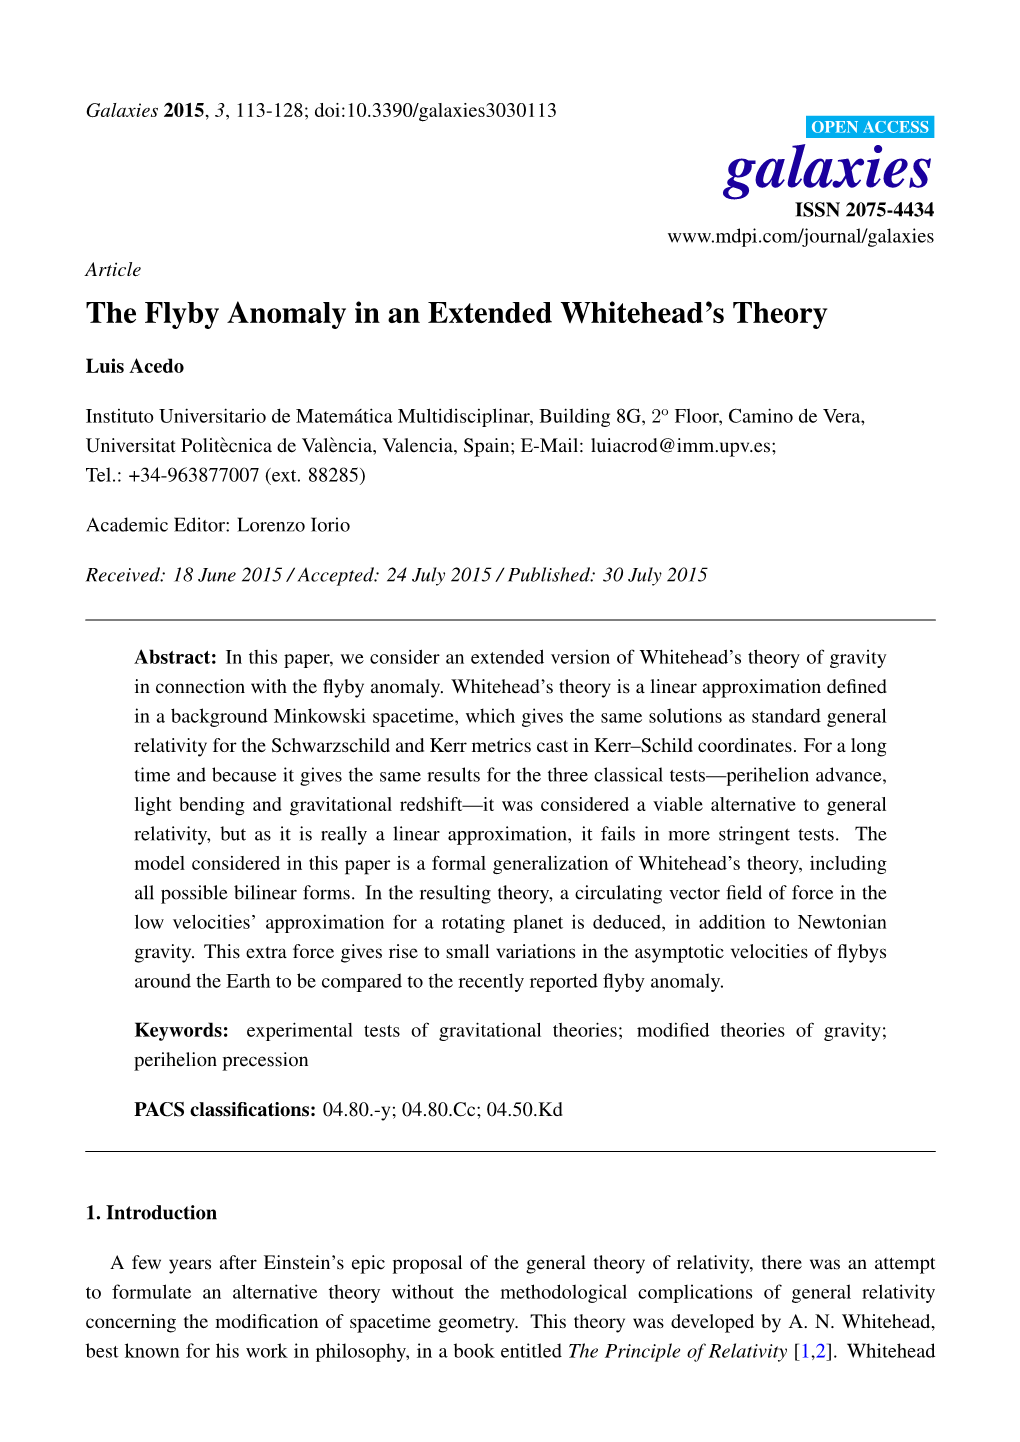 The Flyby Anomaly in an Extended Whitehead's Theory